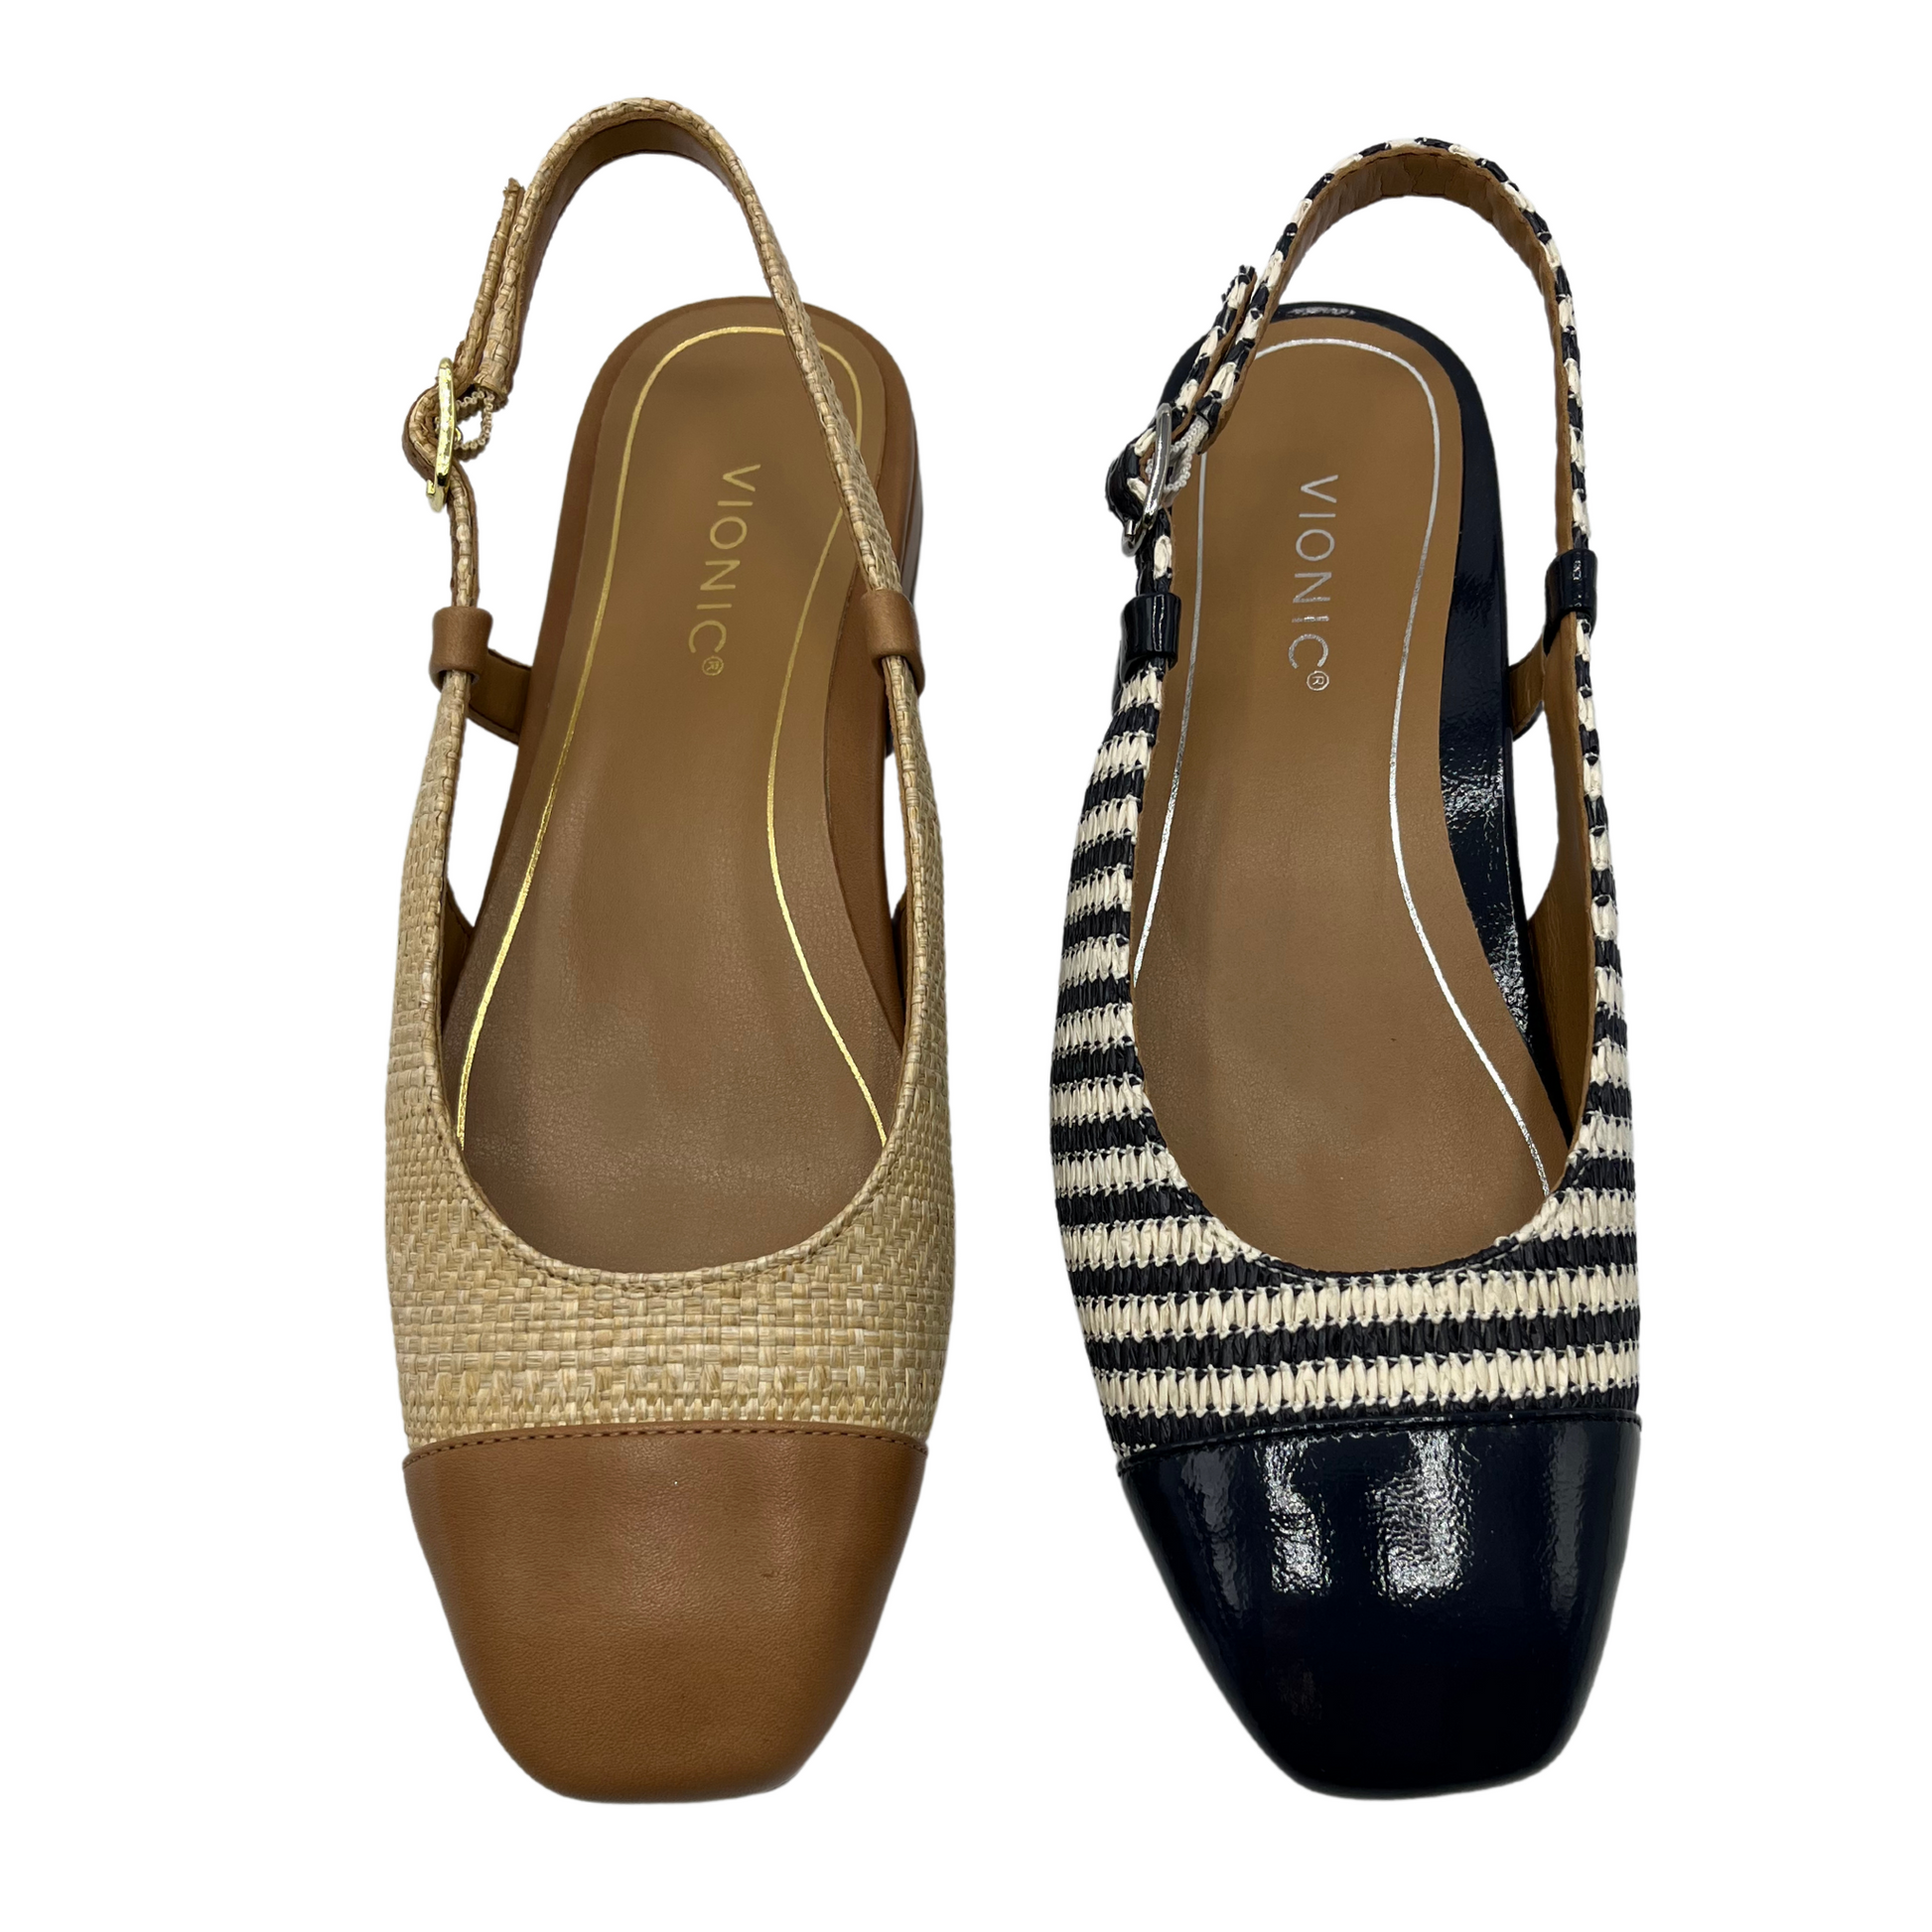 Top view of two slingback flat shoes with square toes. One is beige and one is black and white striped